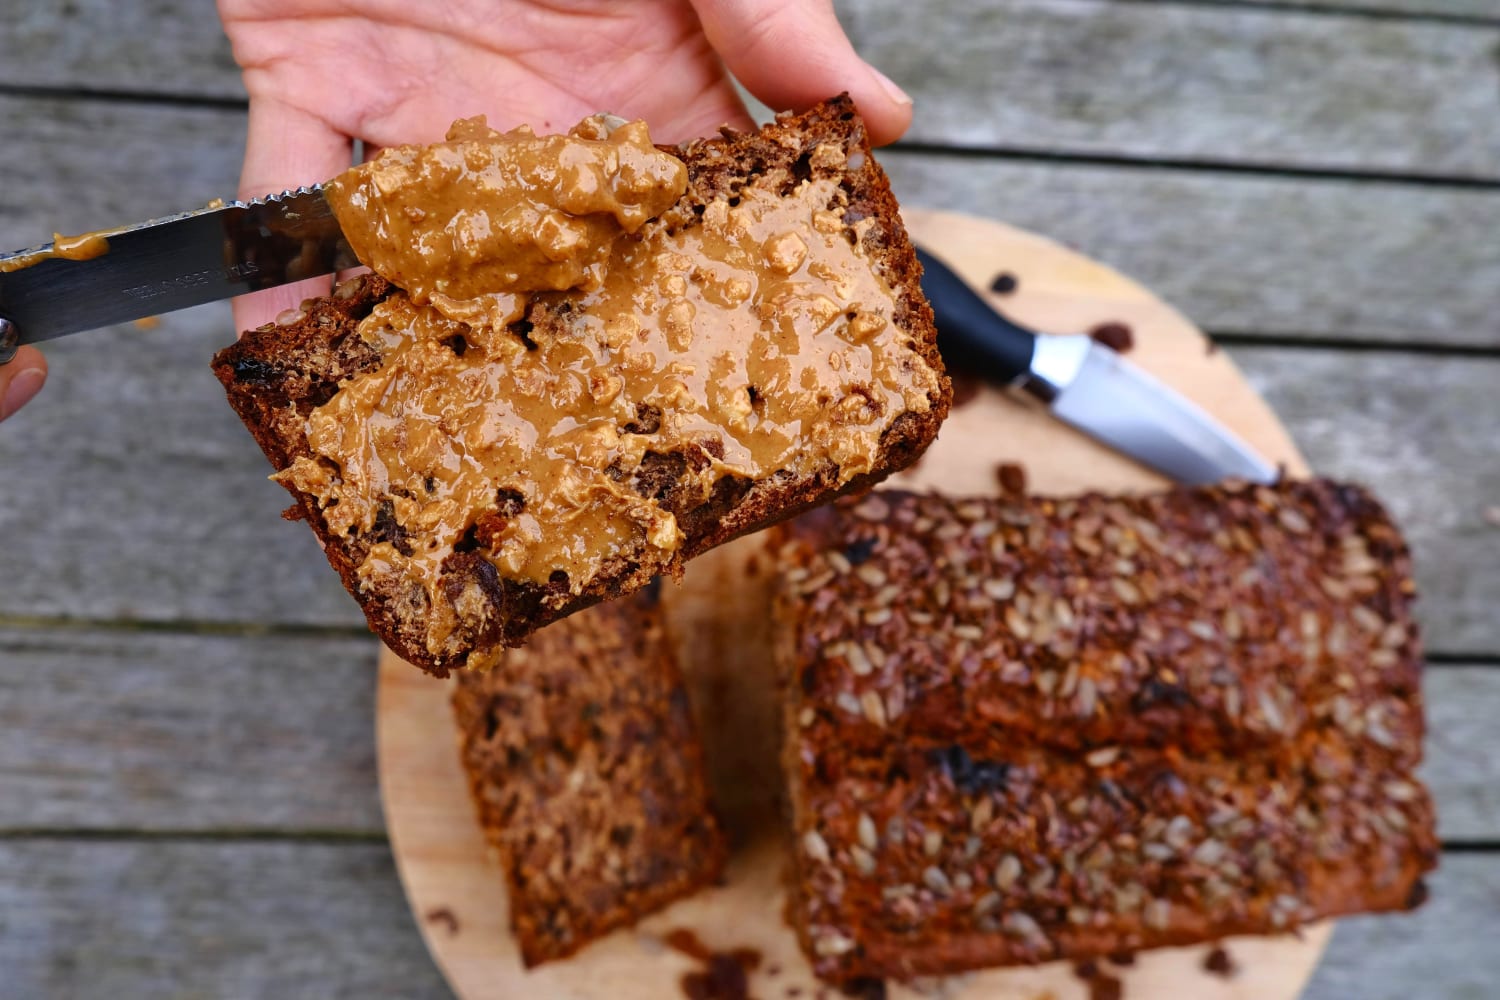 Insanely good and simple to whip up vegan banana bread with seeds and raisins for slow-release energy, the perfect outdoor snack smothered in peanut butter.